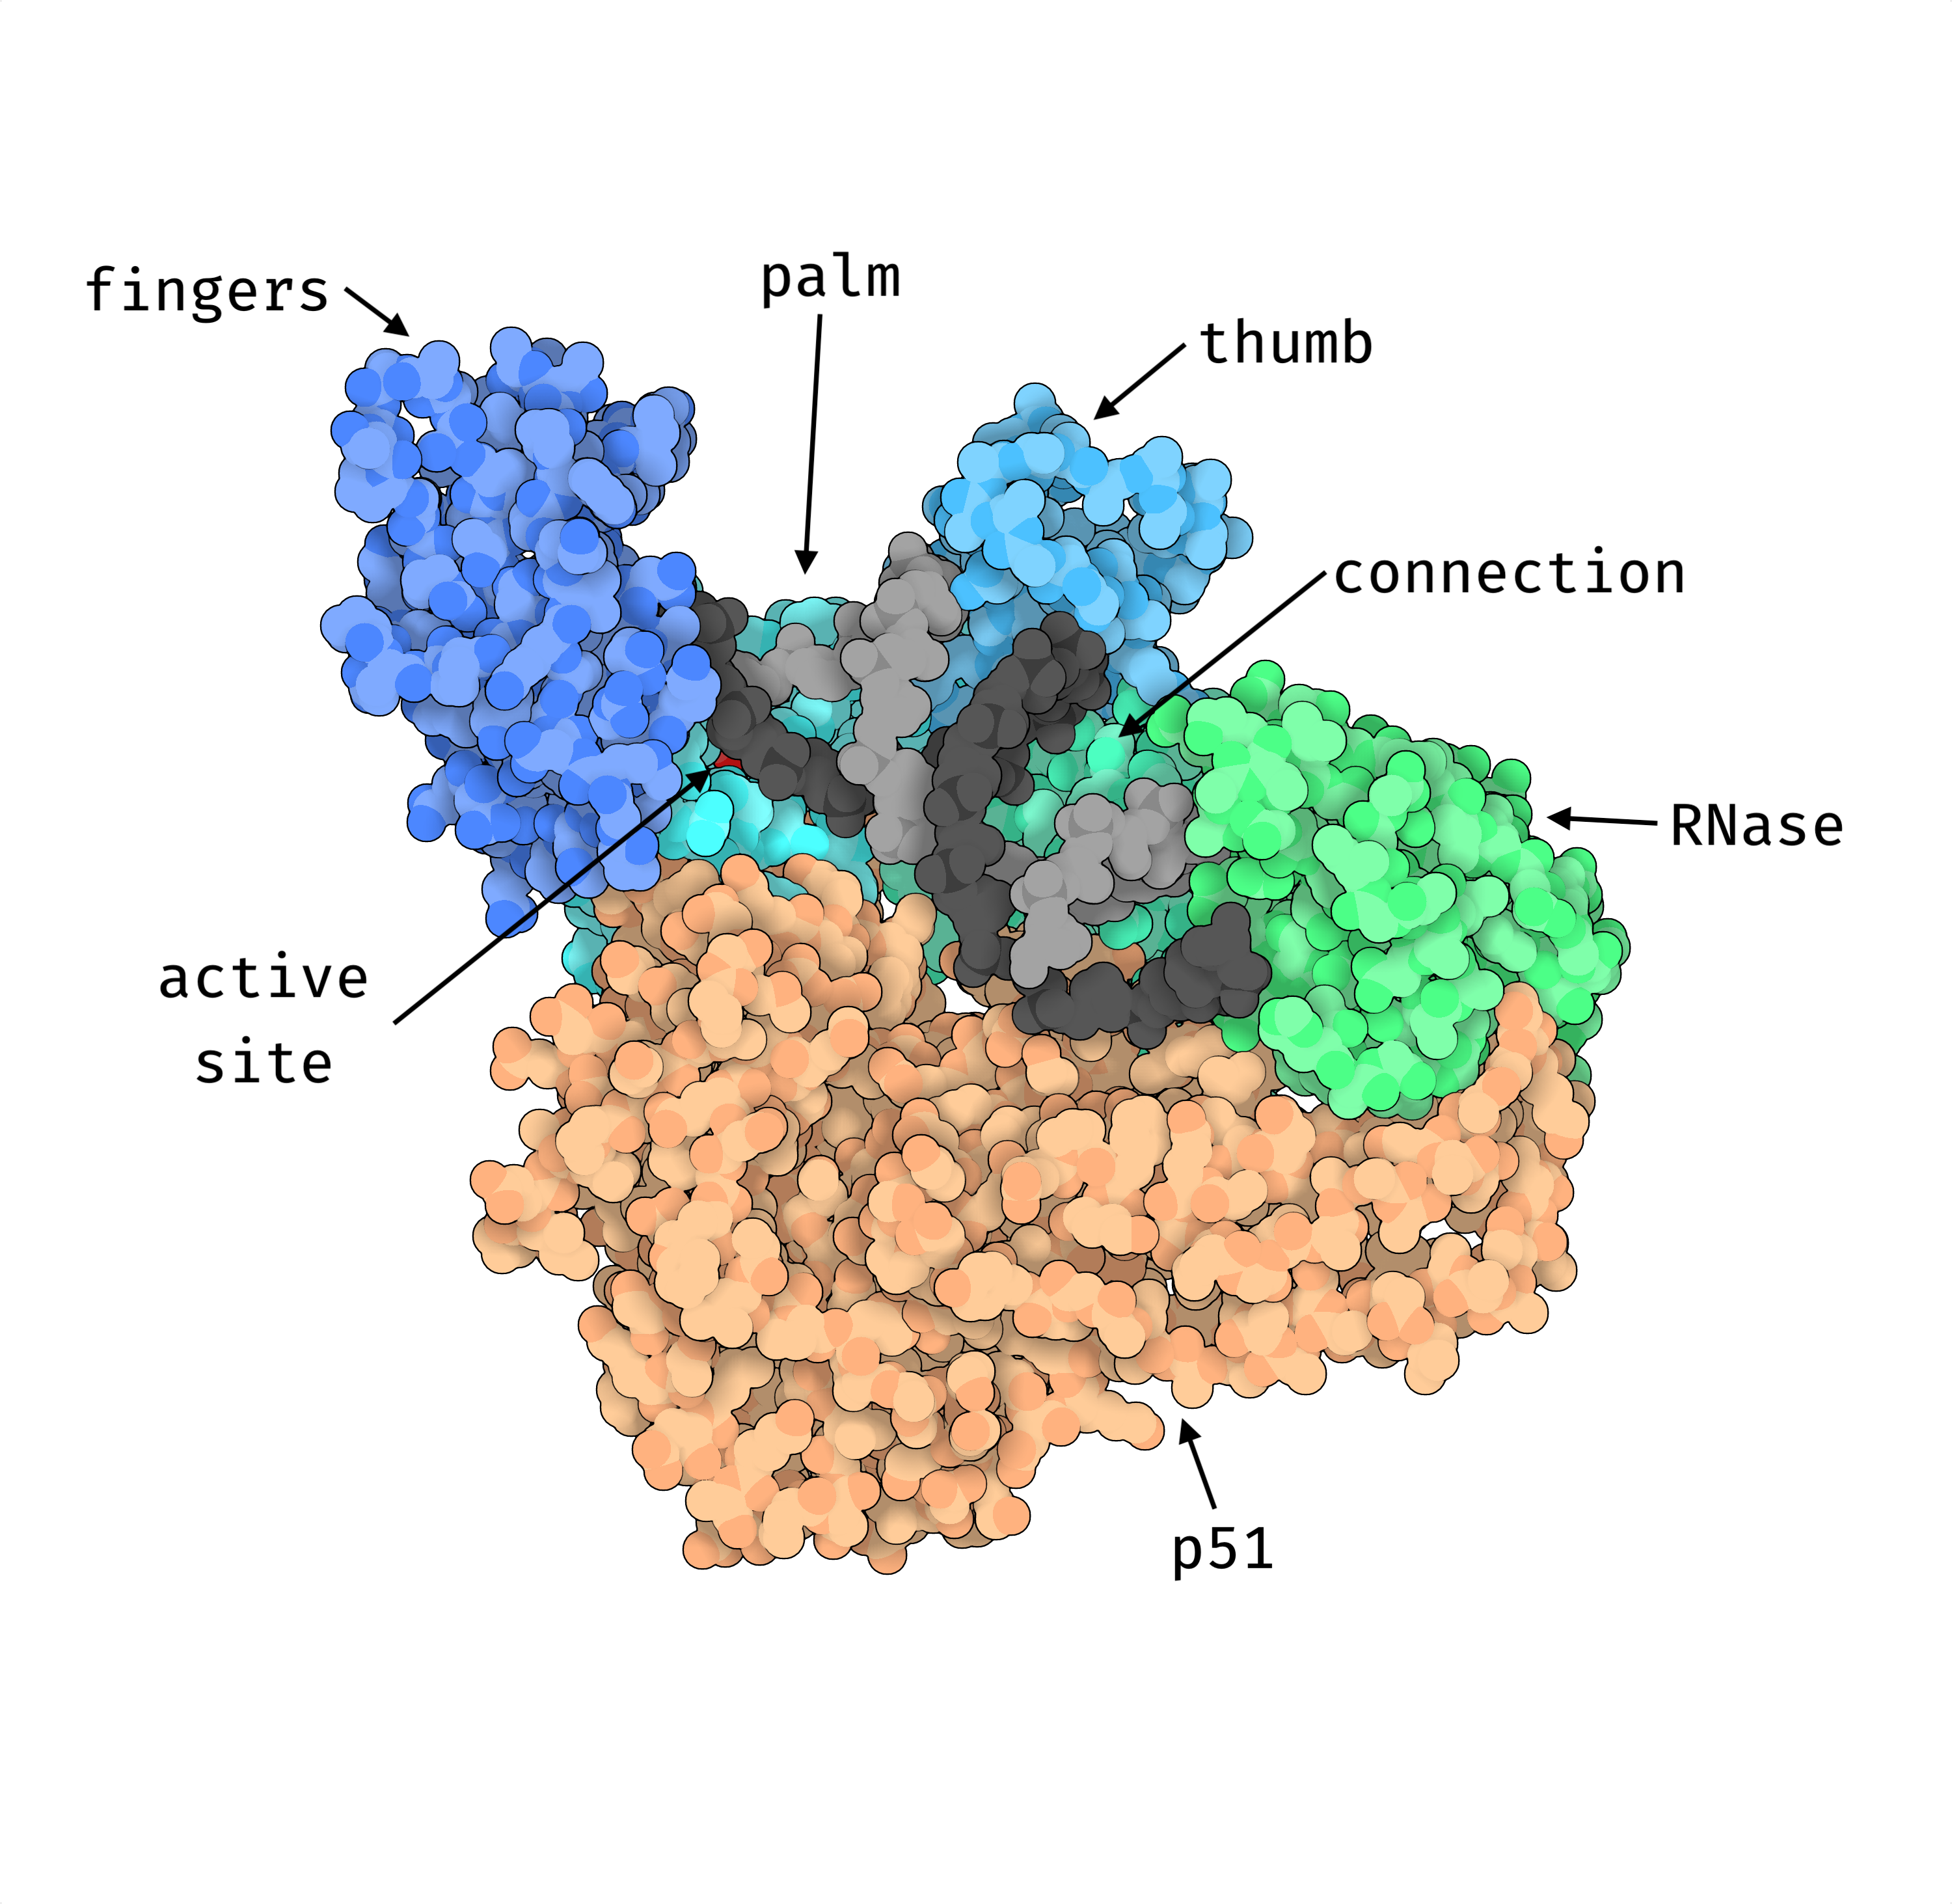 **3D structure of HIV-1 Reverse-transcriptase.**  
The different domains of the p66 subunit are labeled and shown in different shades of blue and green. The structural p51 subunit is shown in orange. The RNA template is shown in dark gray and the newly synthesized DNA strand in light gray. The polymerase active site is shown in red, although mostly hidden by the RNA template. The 3D visualization was produced with Illustrate [@goodsellIllustrateSoftwareBiomolecular2019] using the [2hmi](https://www.rcsb.org/structure/2HMI) PDB structure.